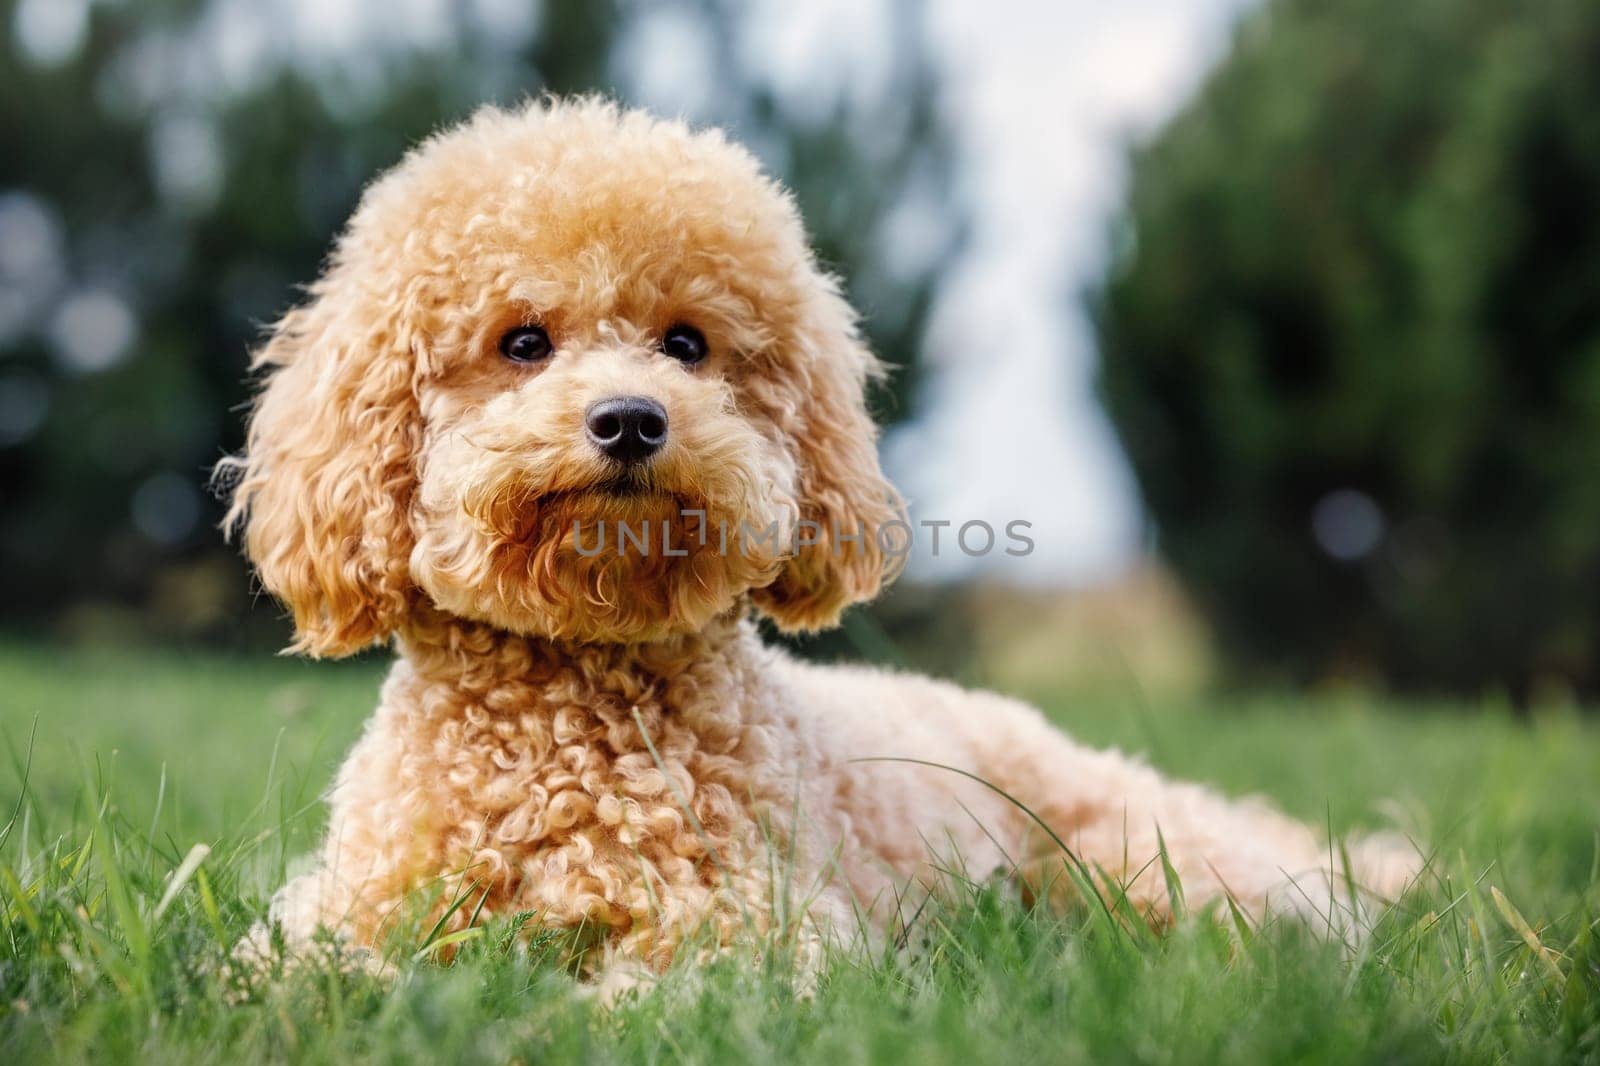 Apricot puppy, small poodle dog posing in front of camera. Laying on the grass background, resting, small dog cute pose. by Lincikas